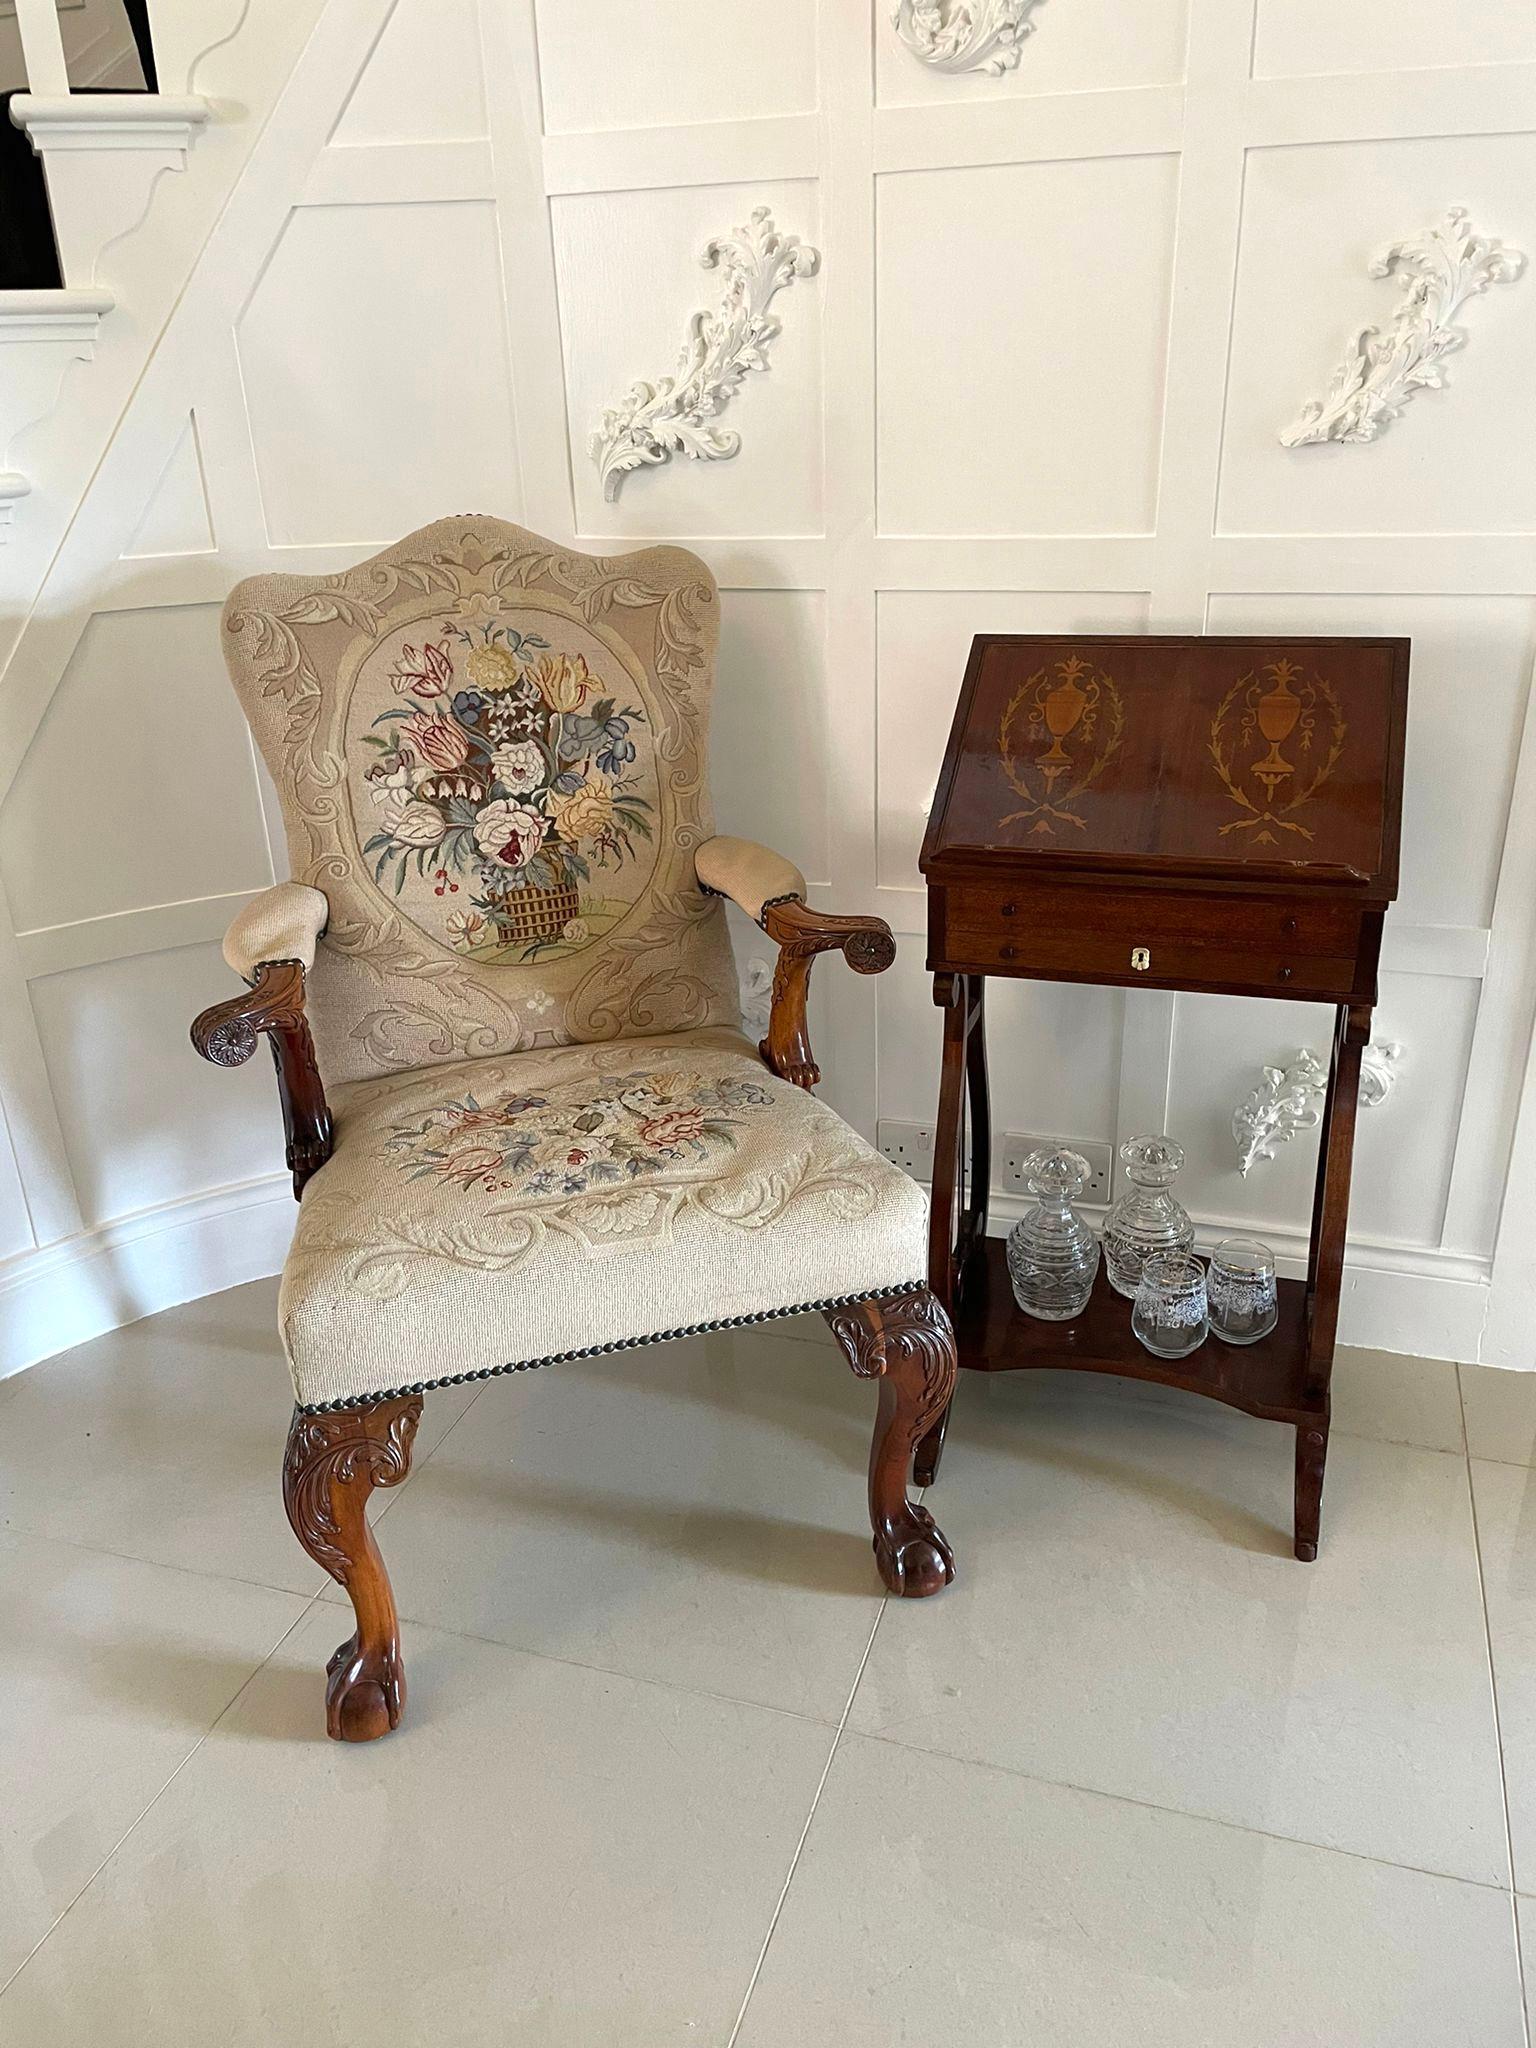 Outstanding quality antique carved mahogany library chair having a fantastic upholstered tapestry back and seat, outstanding quality carved mahogany shaped open arms and standing on outstanding quality carved mahogany shaped cabriole legs with claw